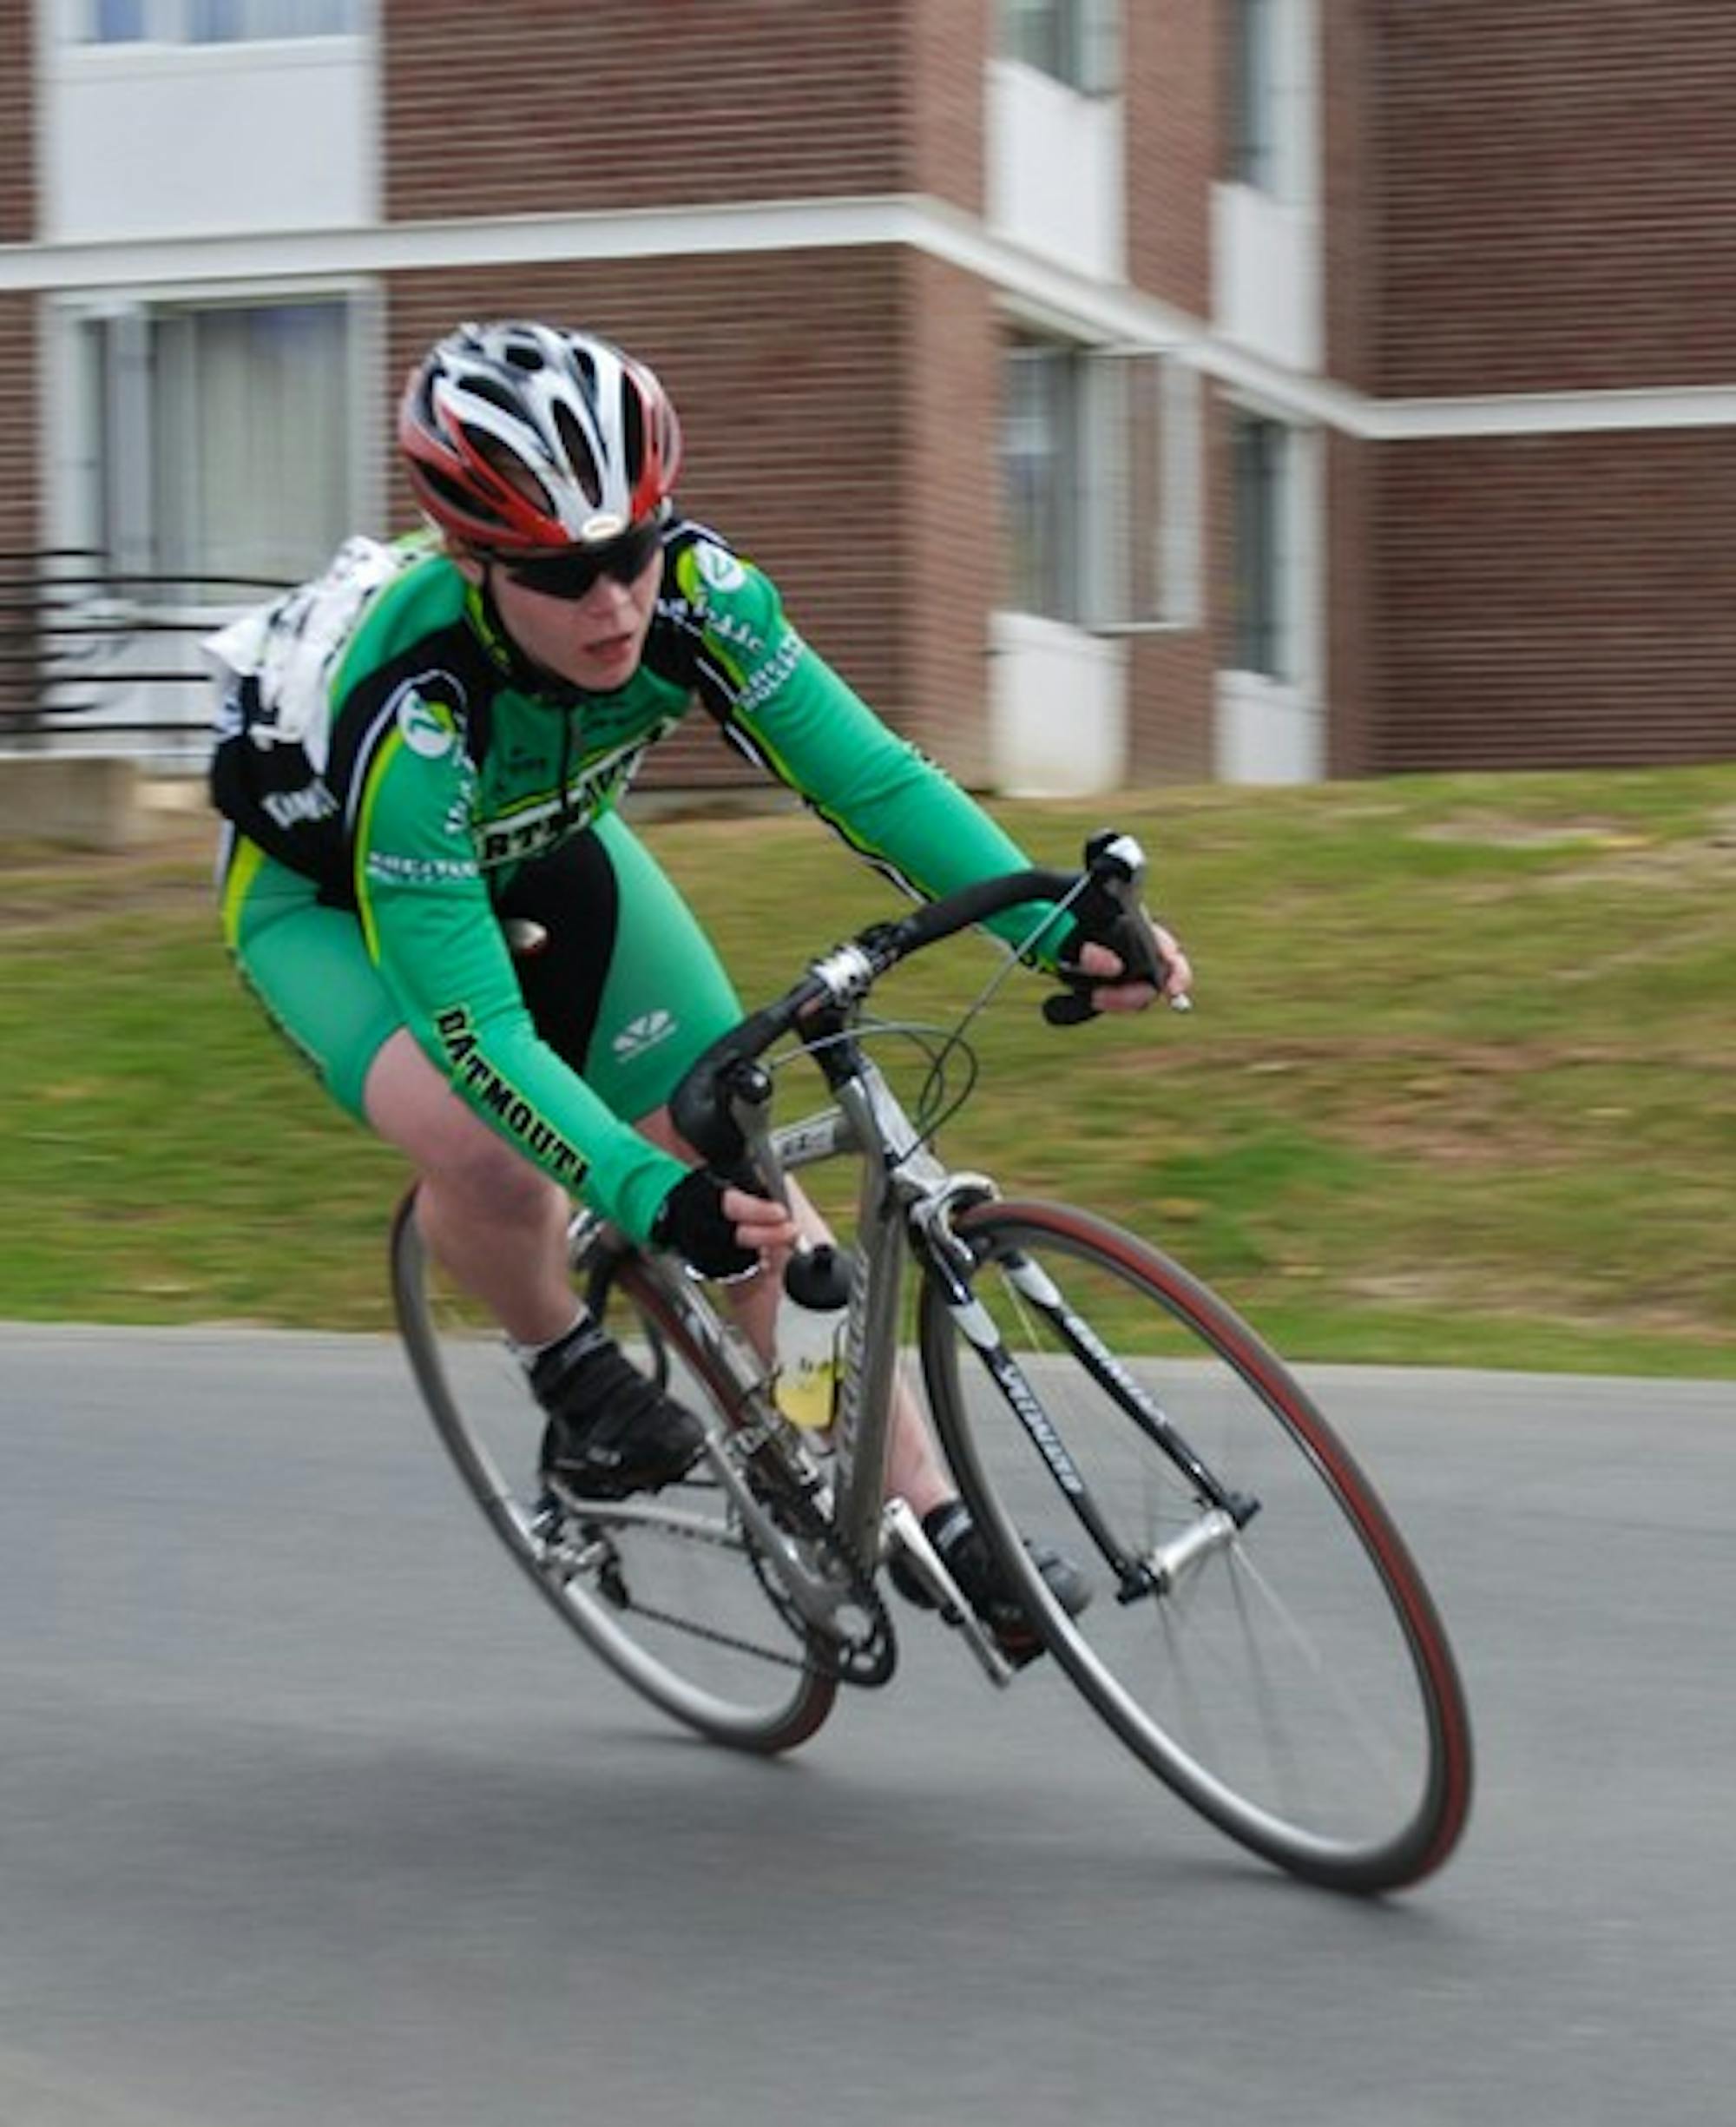 The women cyclers were the cornerstone of the Big Green cycling team at the collegiate championships. Dartmouth finished second out of 33 teams.